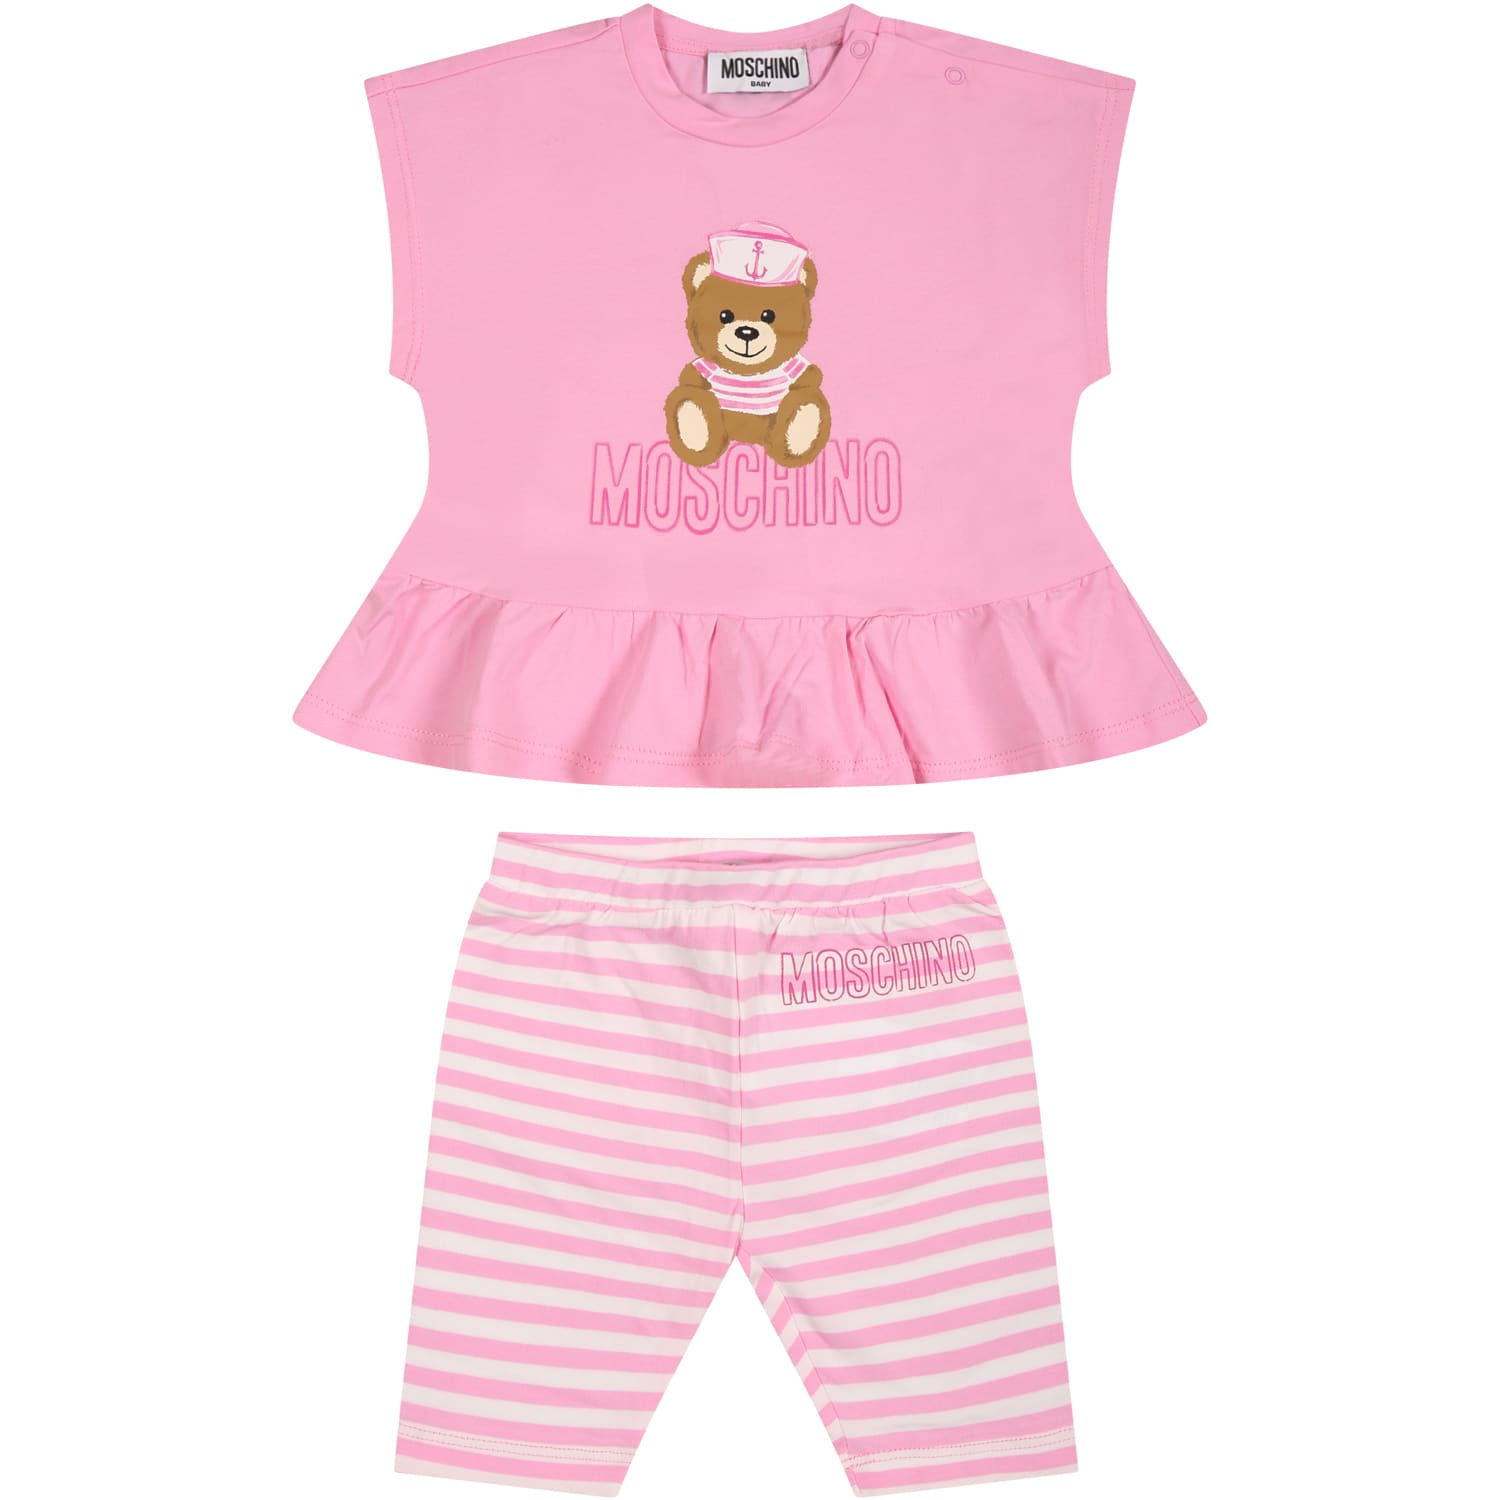 Moschino Pink Suit For Baby Girl With Teddy Bear And Logo